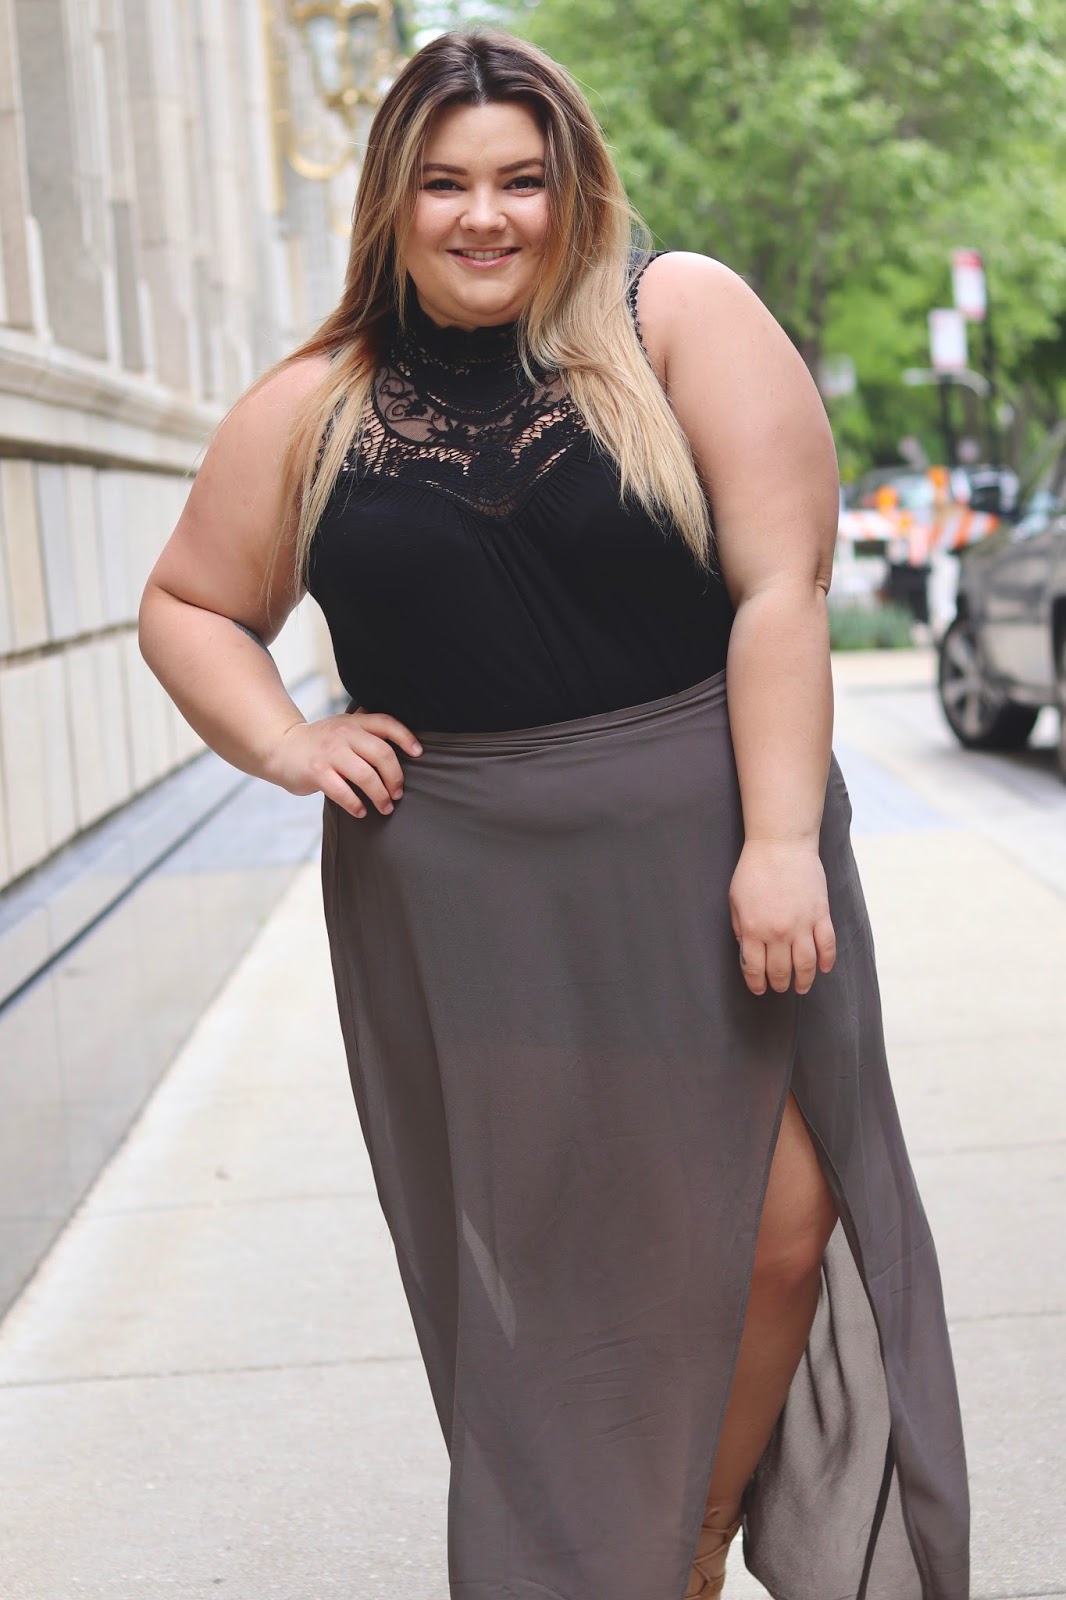 wrap maxi skirt, plus size fashion, affordable plus size clothes, Natalie in the city, Natalie Craig, plus size fashion blogger, scorch magazine, fabulous, plus model magazine, plus size model, crochet, forever 21 plus, Chicago fashion, summer style, Chicago style, curves and confidence, TJ maxx